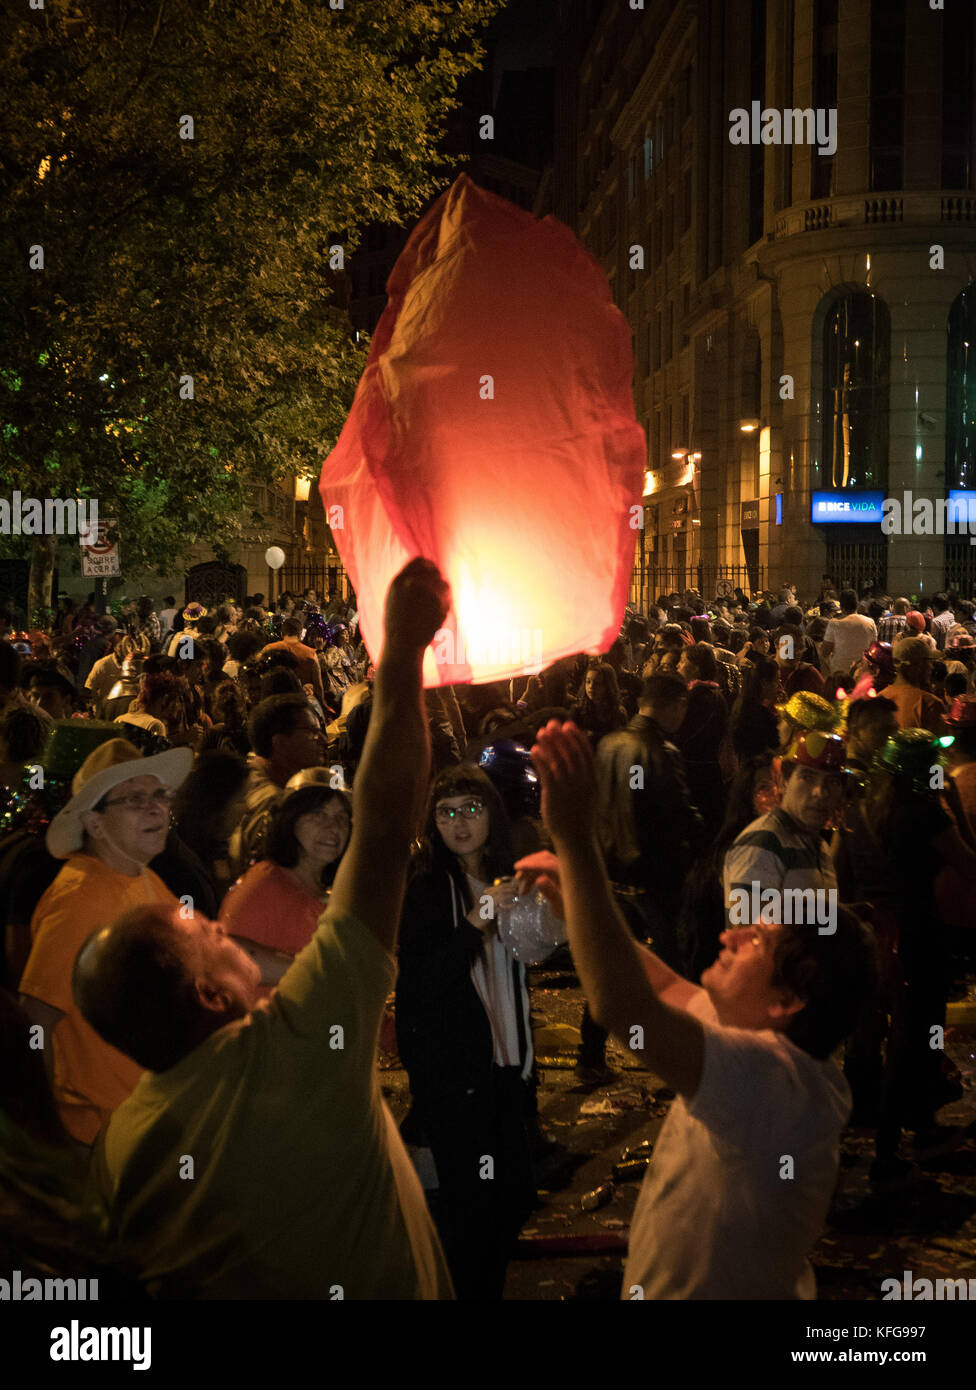 Large crowd of people watching two people launching  a red illuminated flying paper lantern at a New Year's Eve celebration in Santiago, Chile. Stock Photo